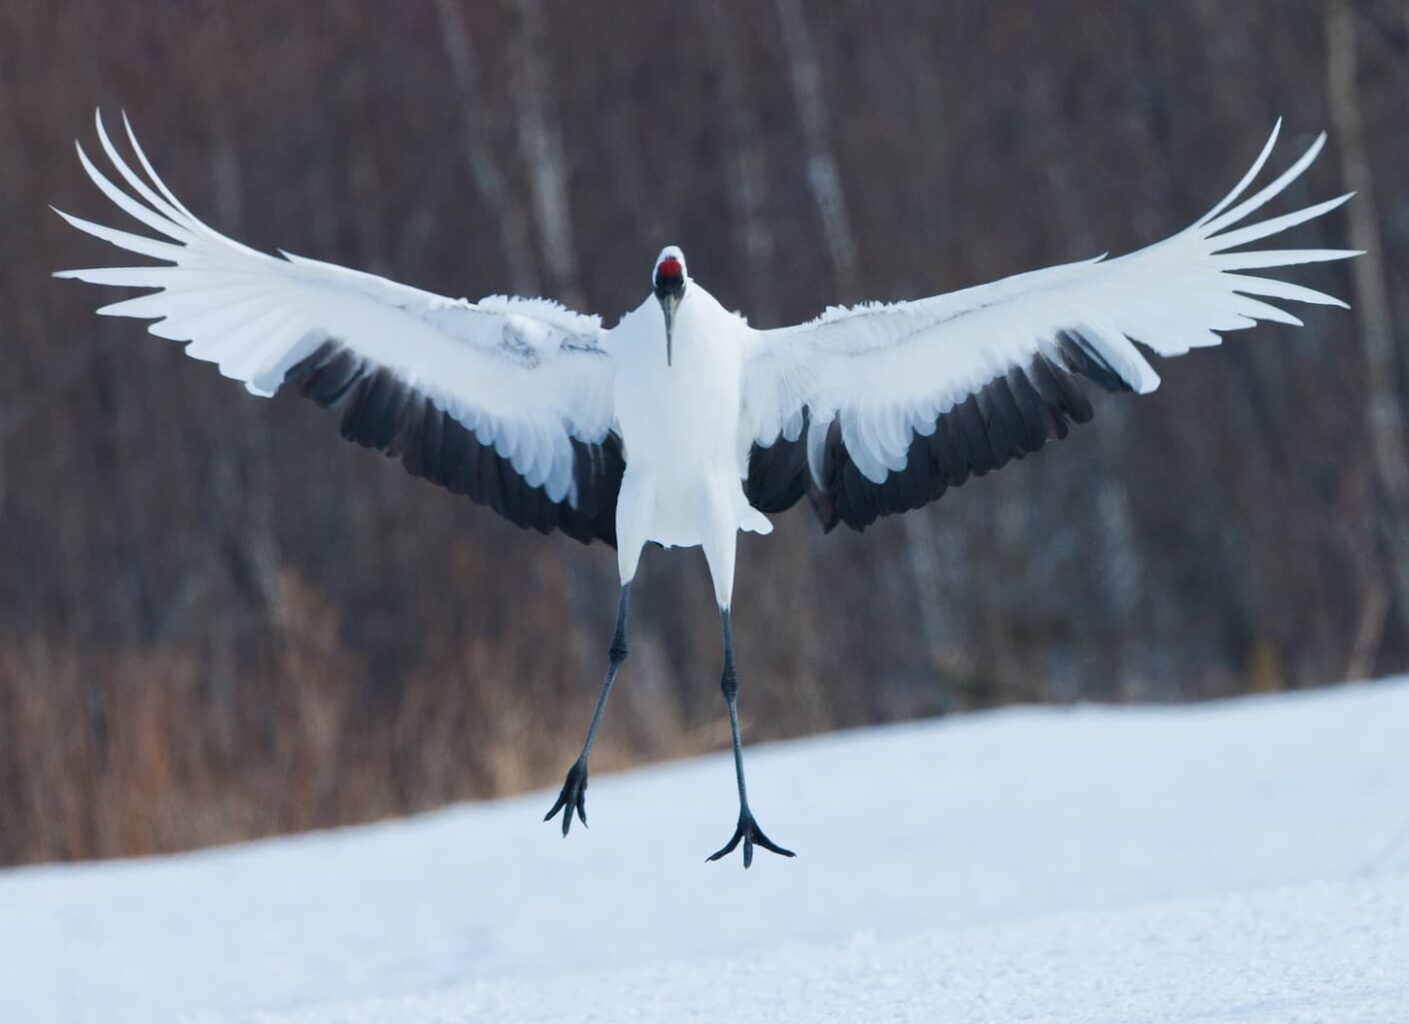 An image of a flying Japanese crane.